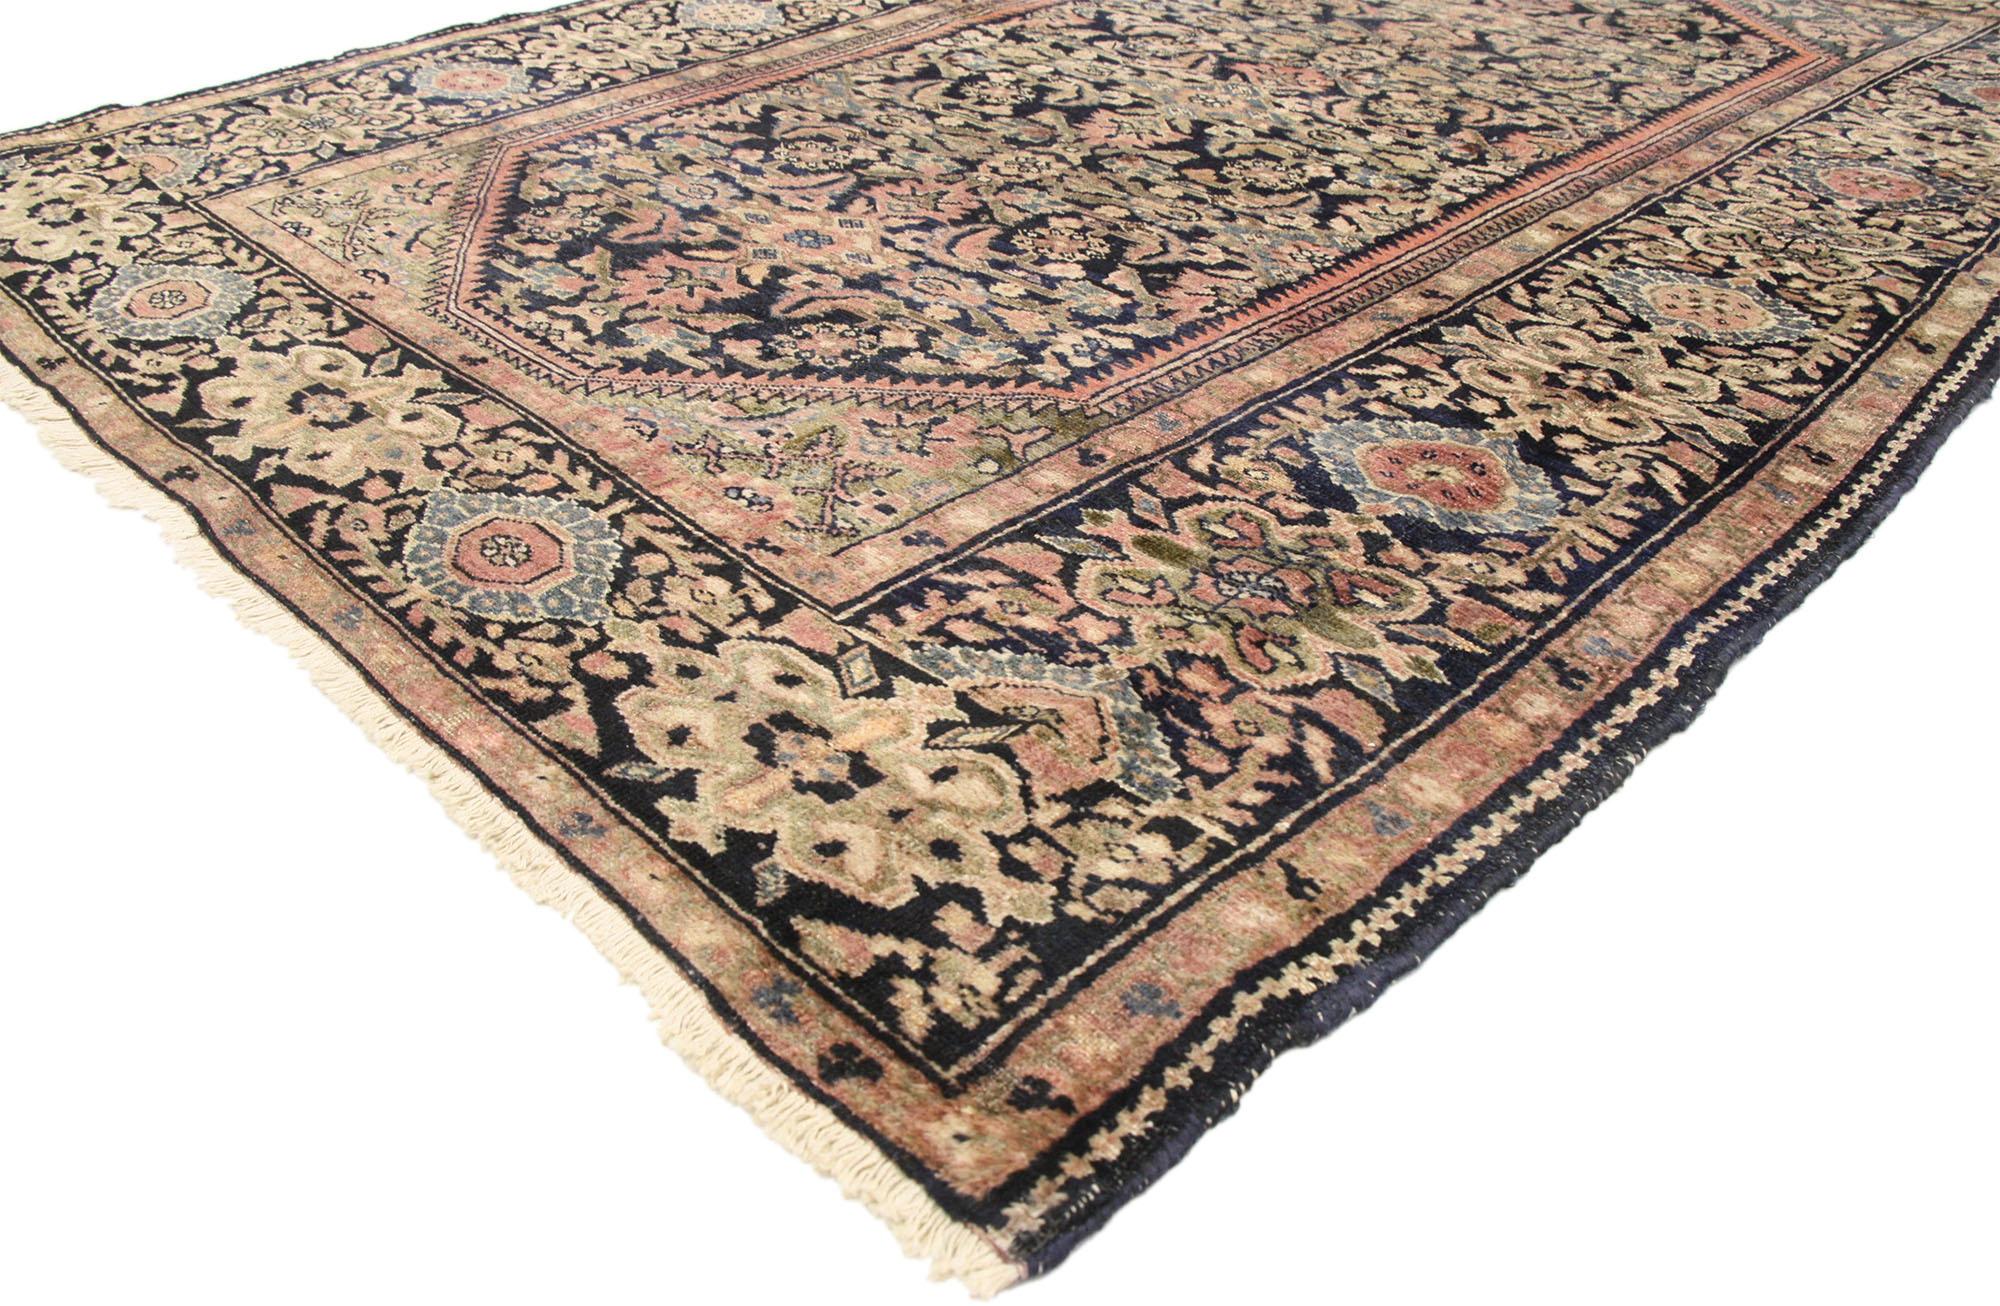 71233, antique Persian Assadabad Hamadan Accent rug. Classic and luxurious, this hand-knotted wool Antique Persian Assadabad Hamadan accent rug features an allover Herati pattern with a cut-out field with jagged edges. It is enclosed with Herati